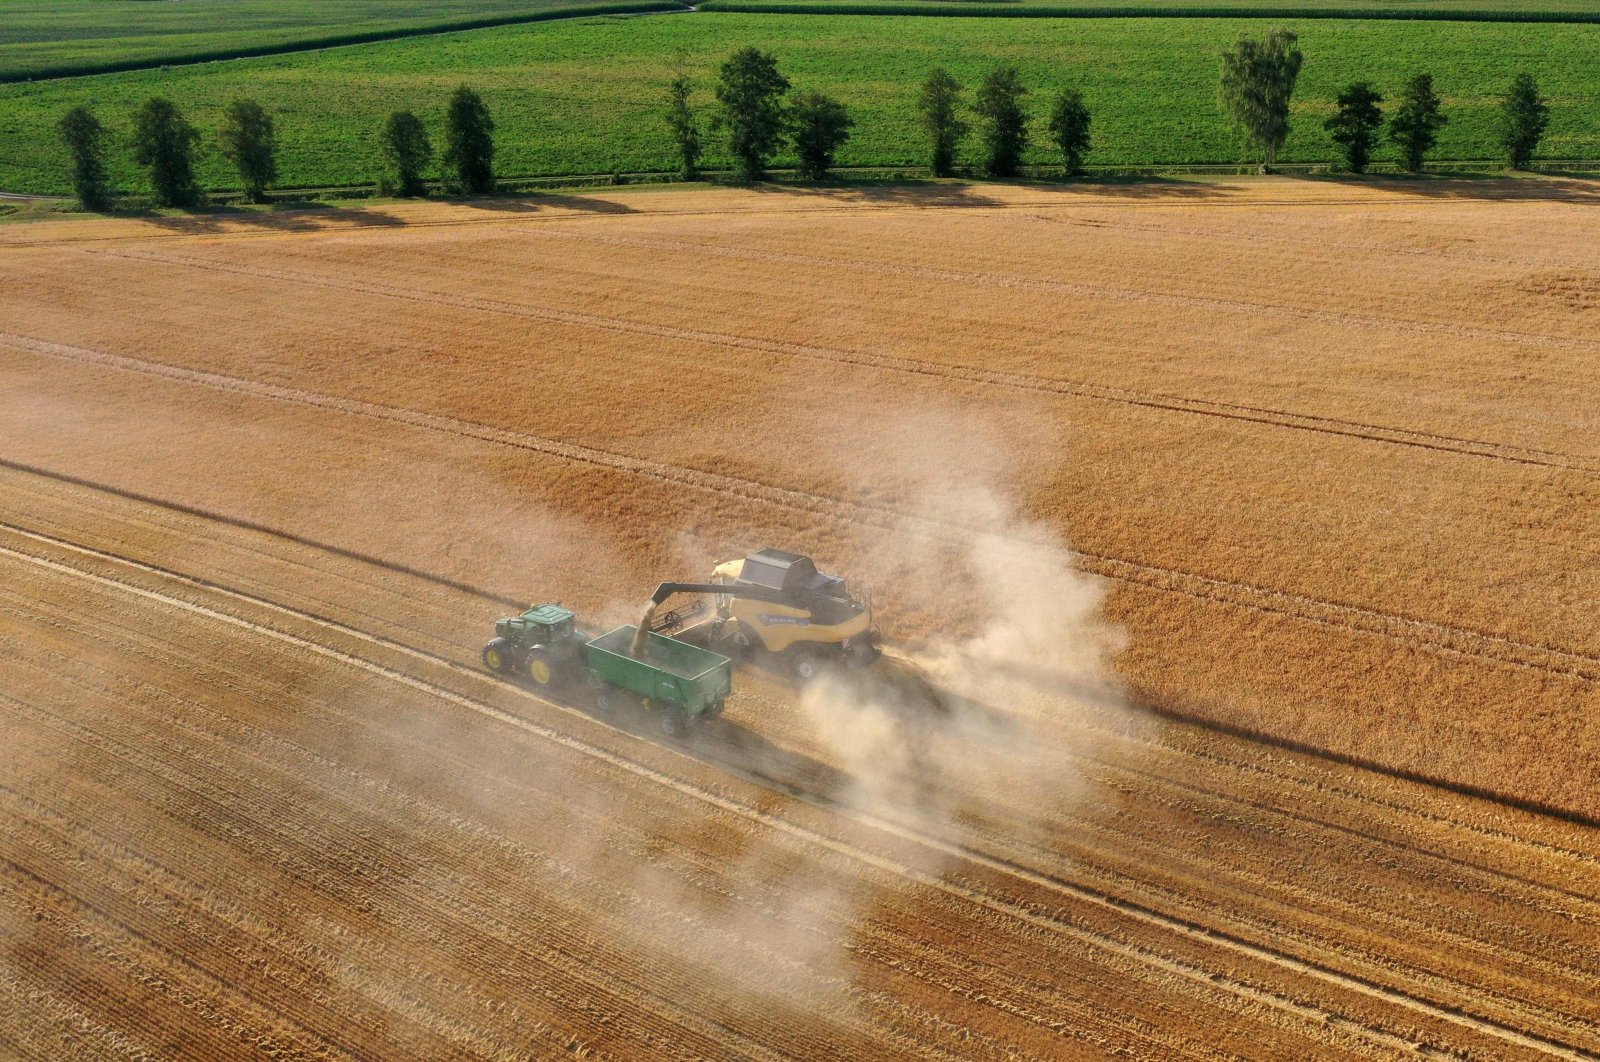 An aerial view shows farmers using combine harvesters and tractors to harvest grain from their fields near the small village of Alling, southern Germany, July 18, 2022. (AFP Photo)